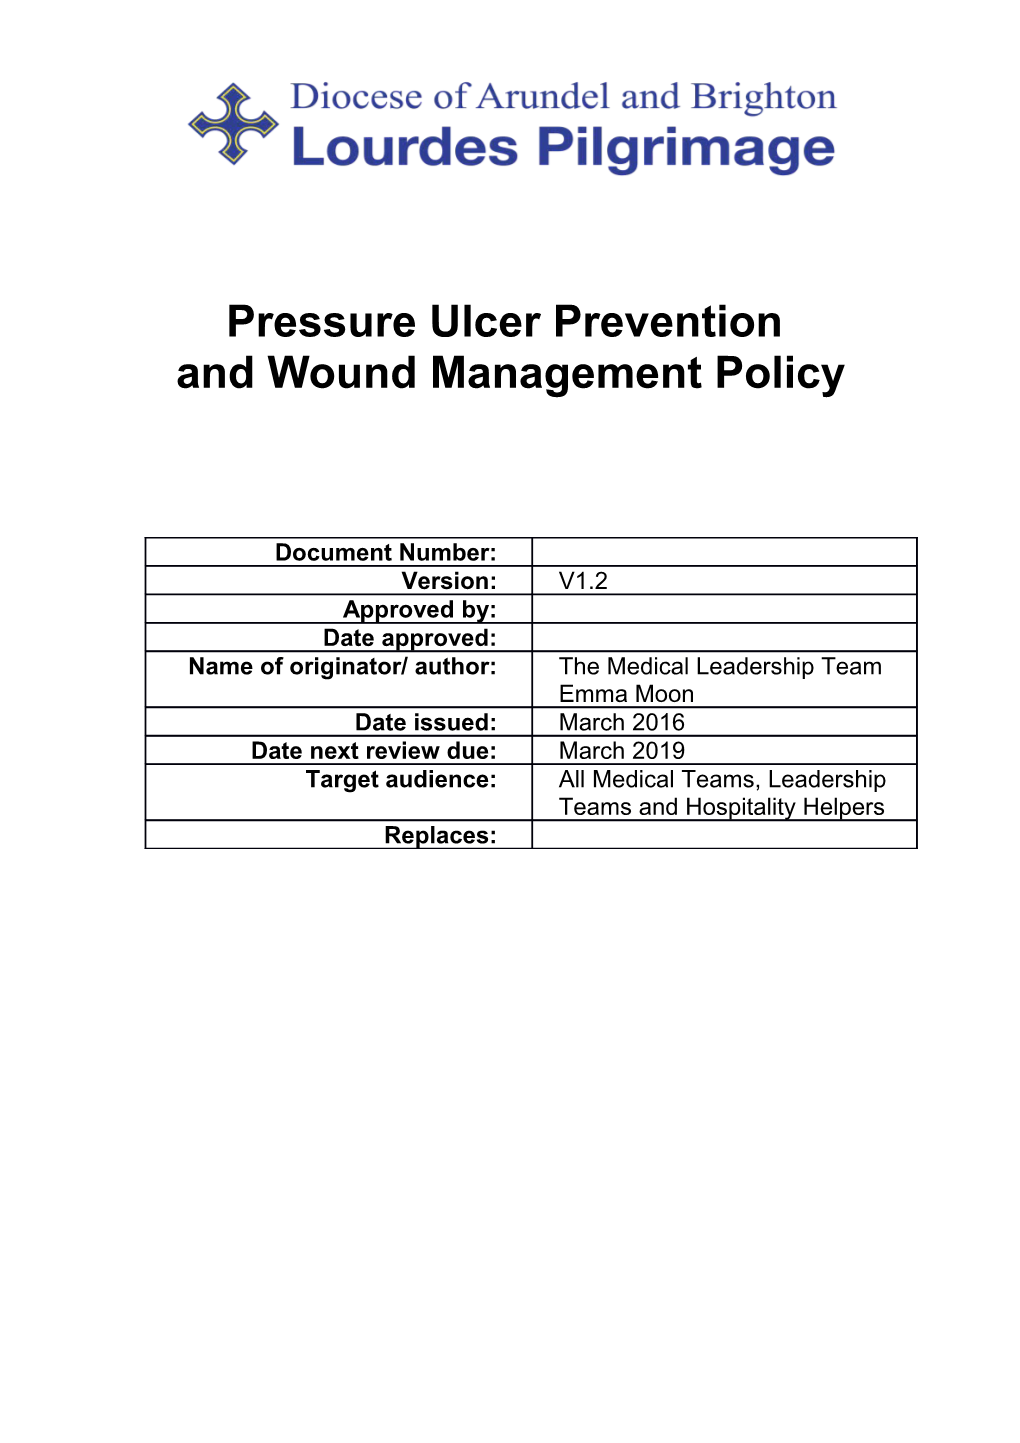 And Wound Management Policy